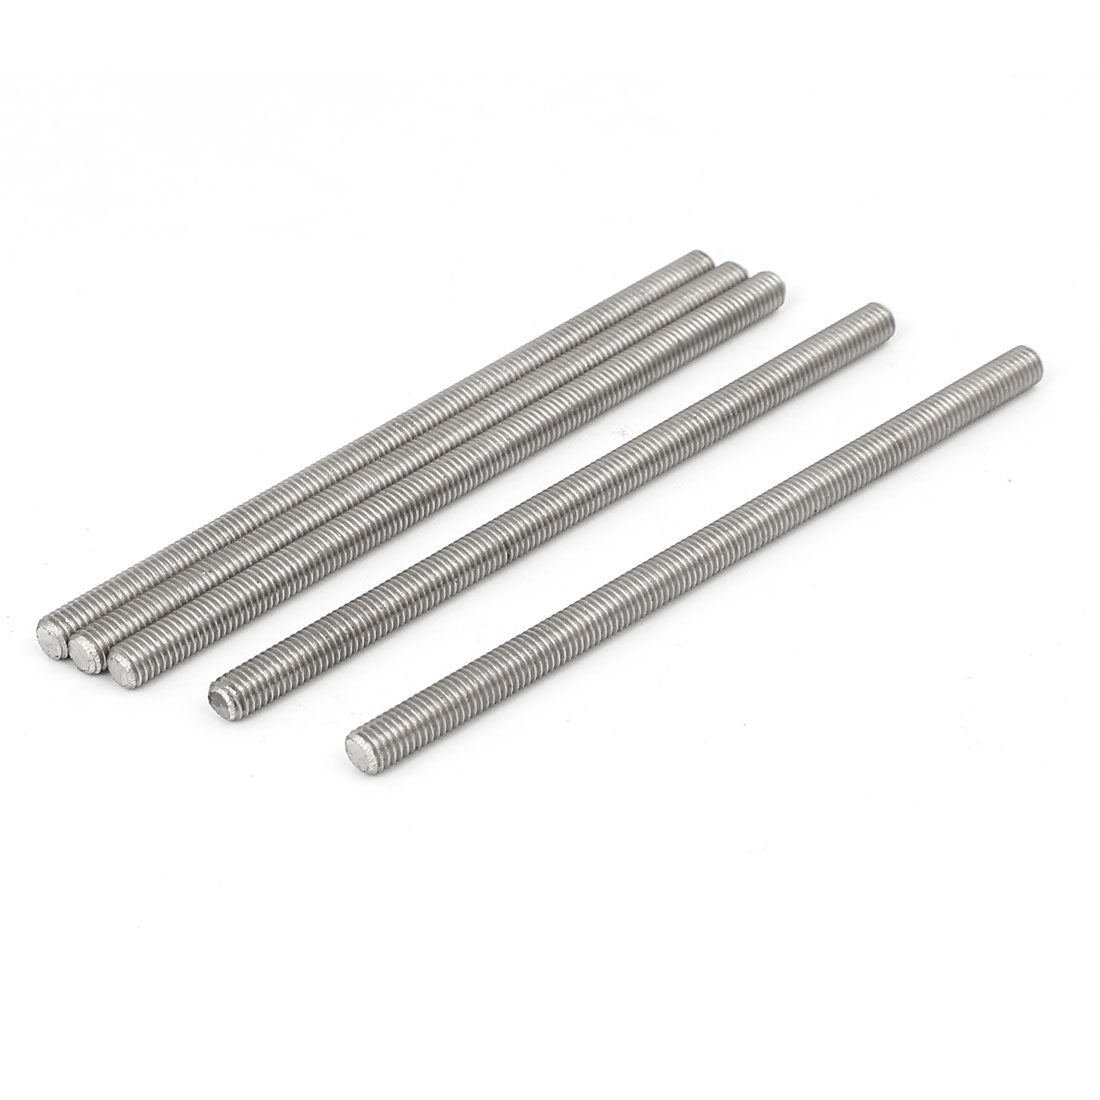 uxcell Uxcell M5 x 100mm 304 Stainless Steel Fully Threaded Rod Bar Studs Fasteners 5 Pcs